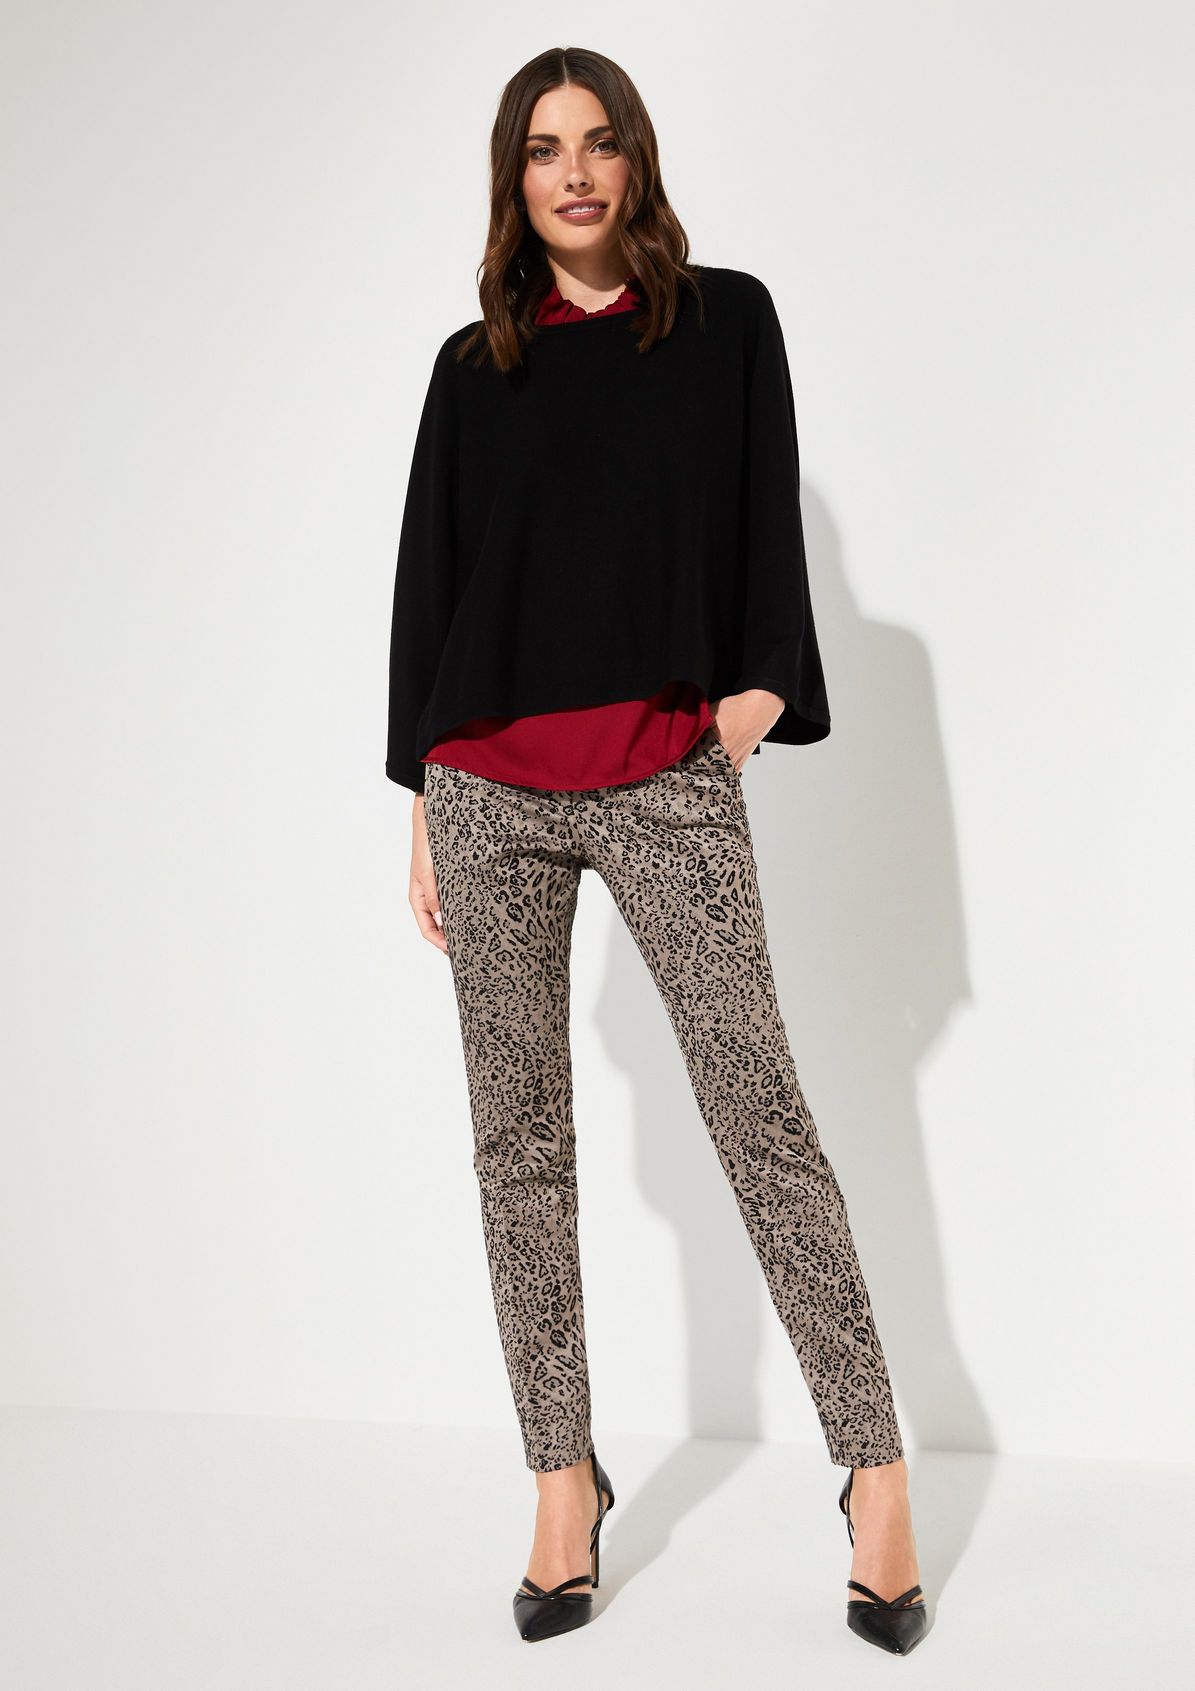 Satin trousers with an exciting leopard pattern from comma